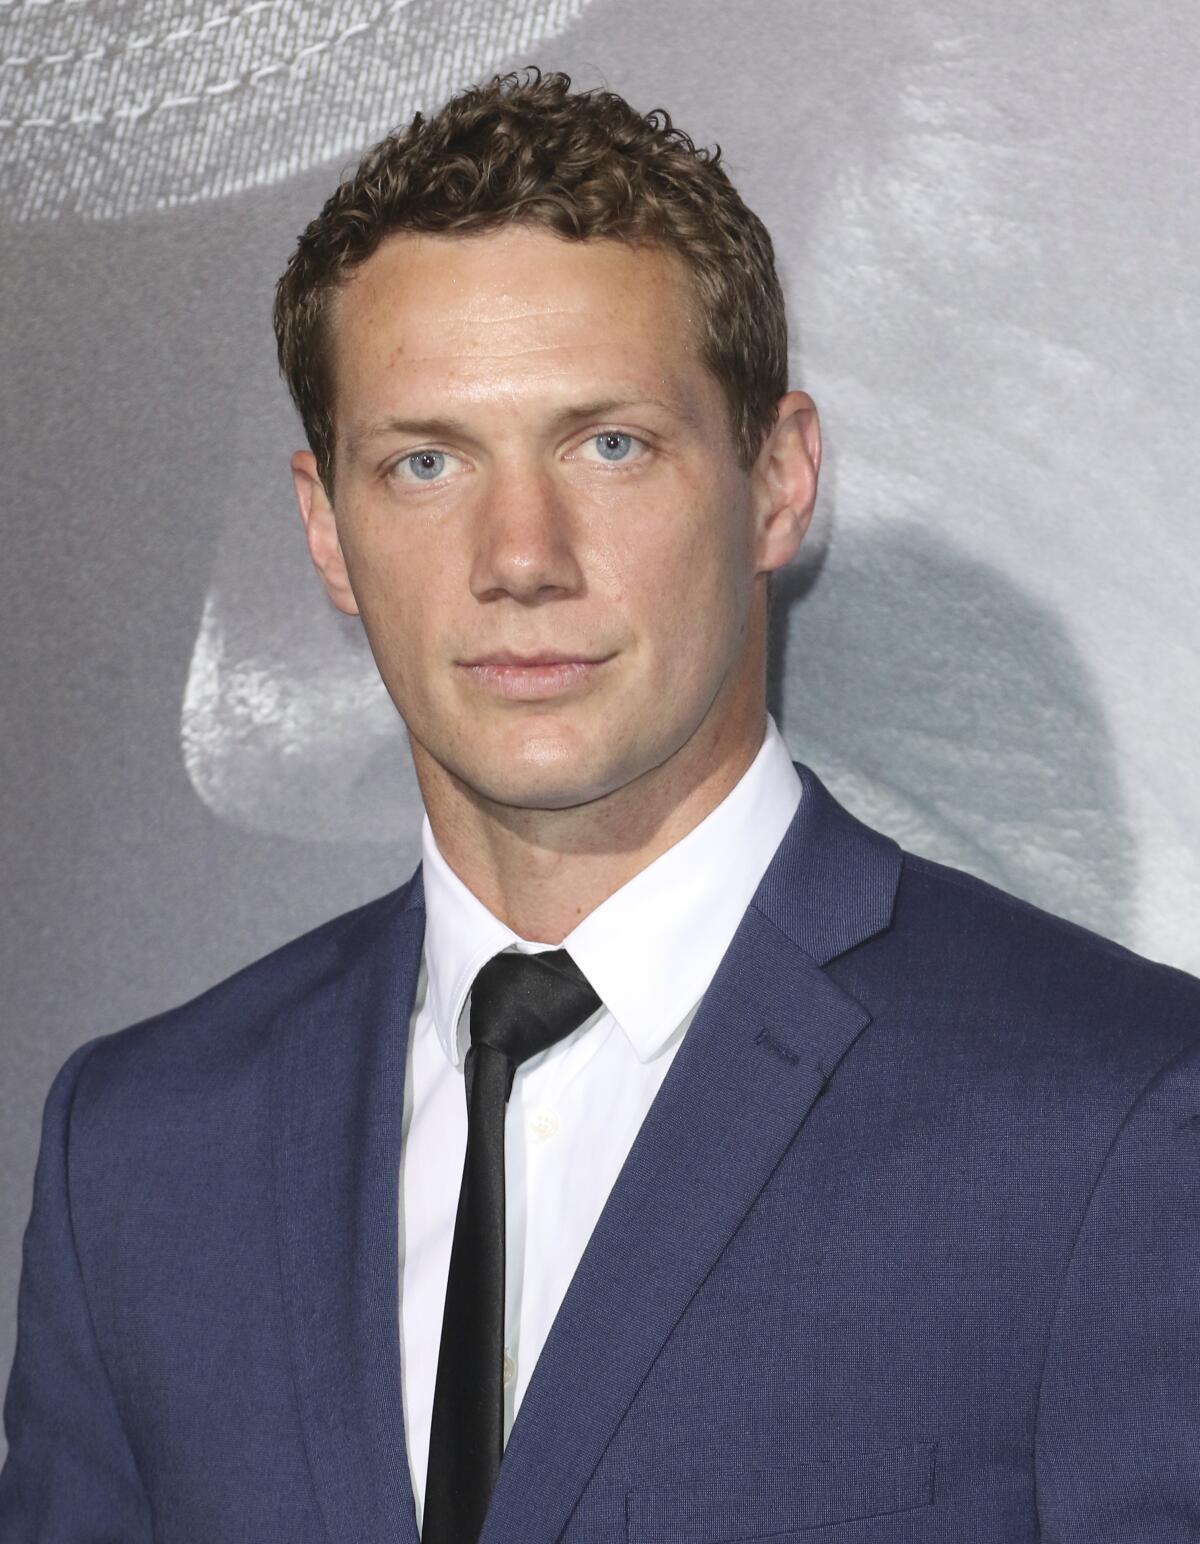 A man in a blue suit, black tie and white dress shirt posing in front of a gray background at a movie premiere